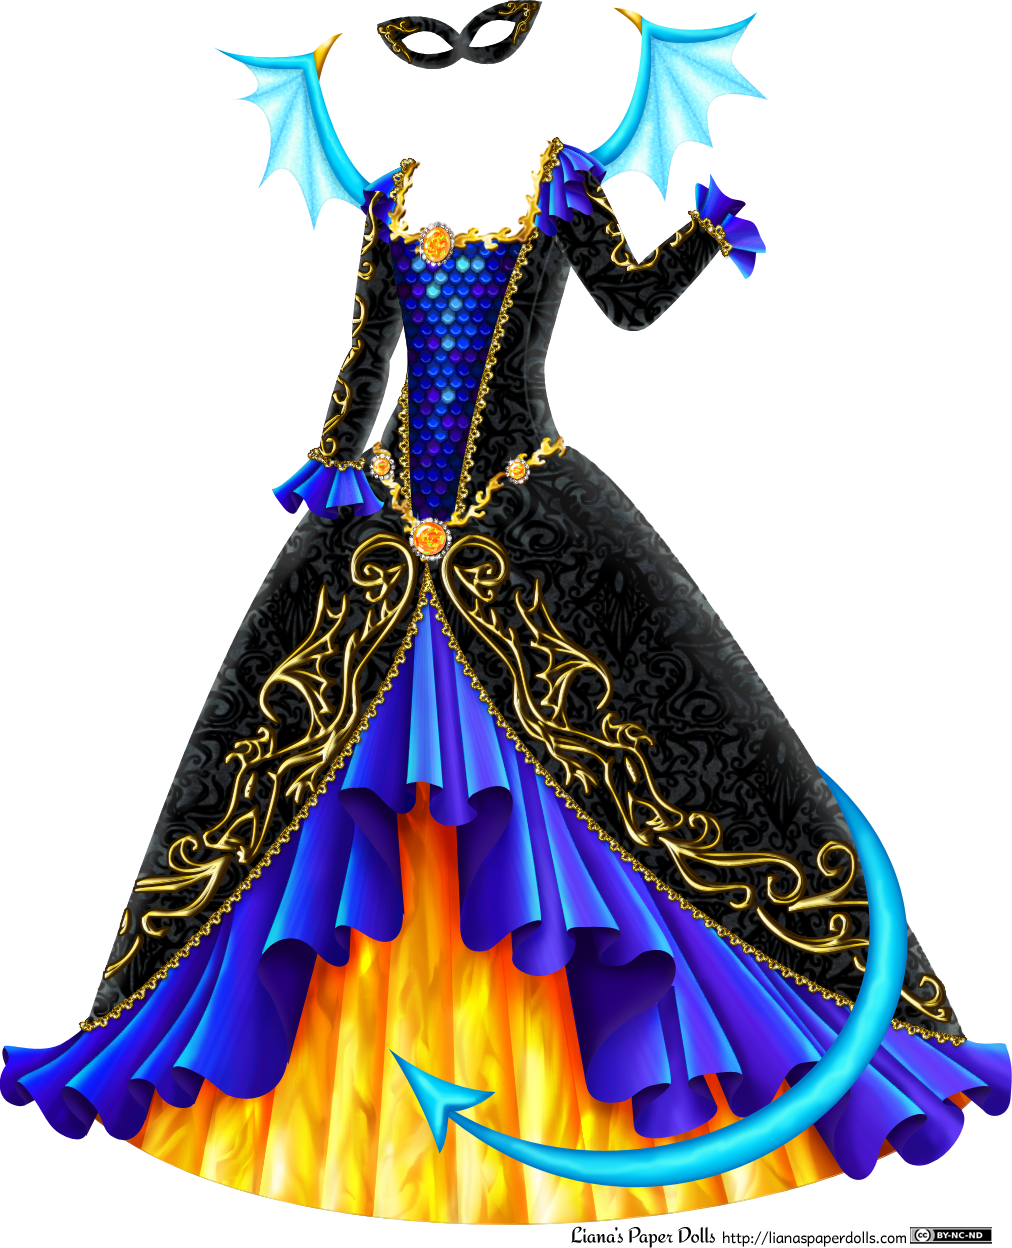 A black velvet masquerade gown with a square neckline, long sleeves and a large, bell-shaped skirt. At the neckline is a gold band in a stylized flame pattern, with a large fire opal surrounded by rhinestones set in the middle. The sleeves have blue ruffles at the shoulders and at the wrists, with iridescent blue-green highlights and shades of purple in the shaded areas. There's a bit of golden lace above each ruffle. A pattern of golden scrolls runs down the length of the sleeve. The bodice has a long, triangle-shaped area from the neckline to the waist patterned with shiny blue and purple dragon scales and bordered with delicate gold lace. At the waist is a gold band with a stylized flame pattern, set with three fire opals surrounded by rhinestones. The overskirt is open at the front and edged with a blue iridescent ruffle and golden lace. A golden pattern of a stylized dragon breathing flames is on the edge of the skirt. The underskirt appears to be made of fire. There's a light blue tail curling over the edge of the skirt and light blue wings at the shoulders, tipped with golden horns, and there's a small black velvet mask decorated with golden scrolls.